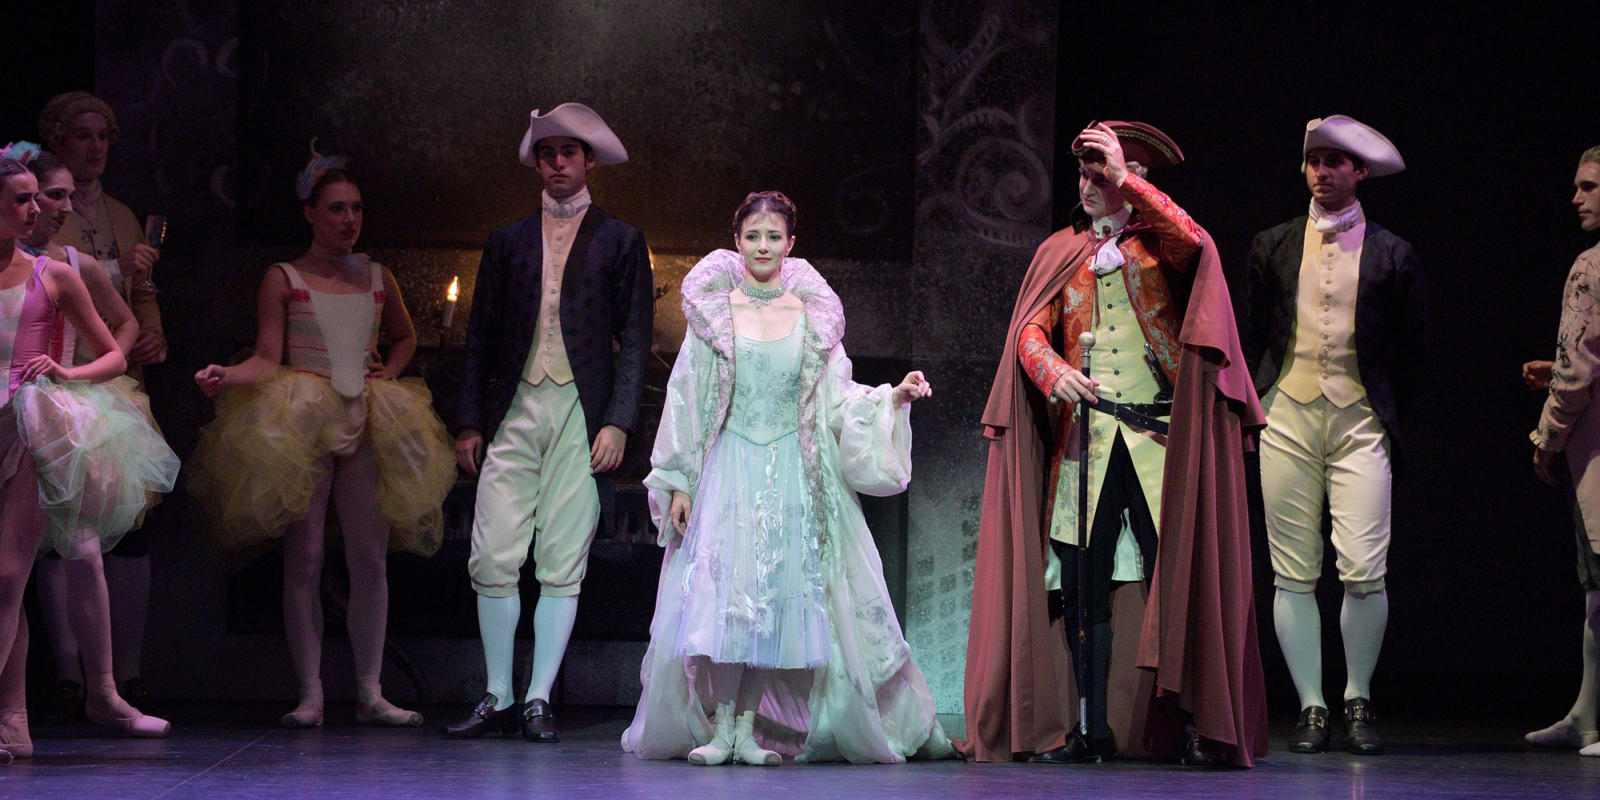 An image from a performance of Manon